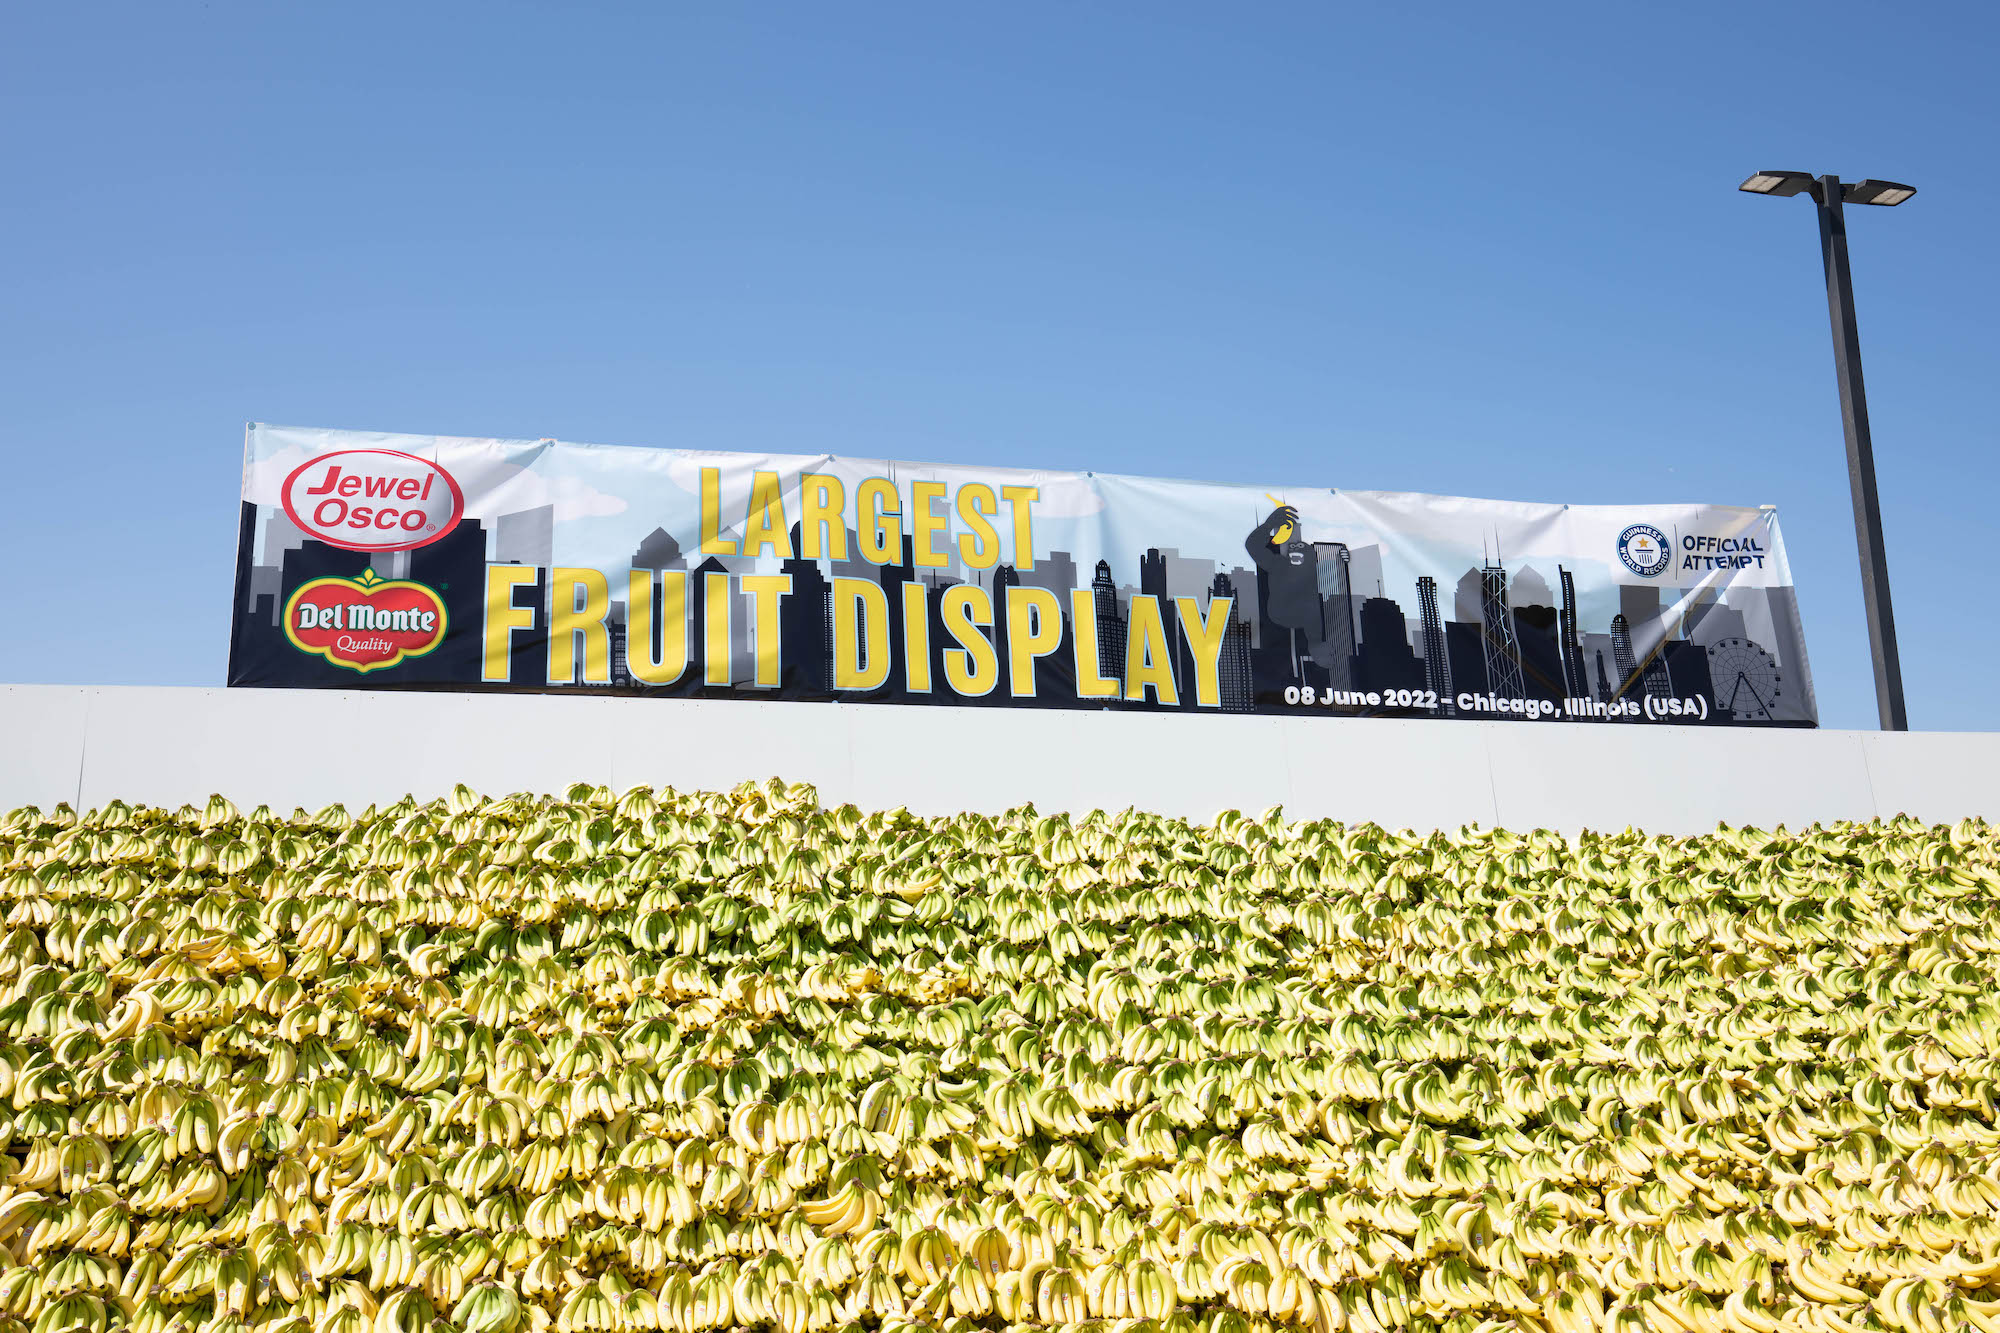   Together, a fresh produce supplier and retailer broke a world record: World’s Largest Fruit Display.